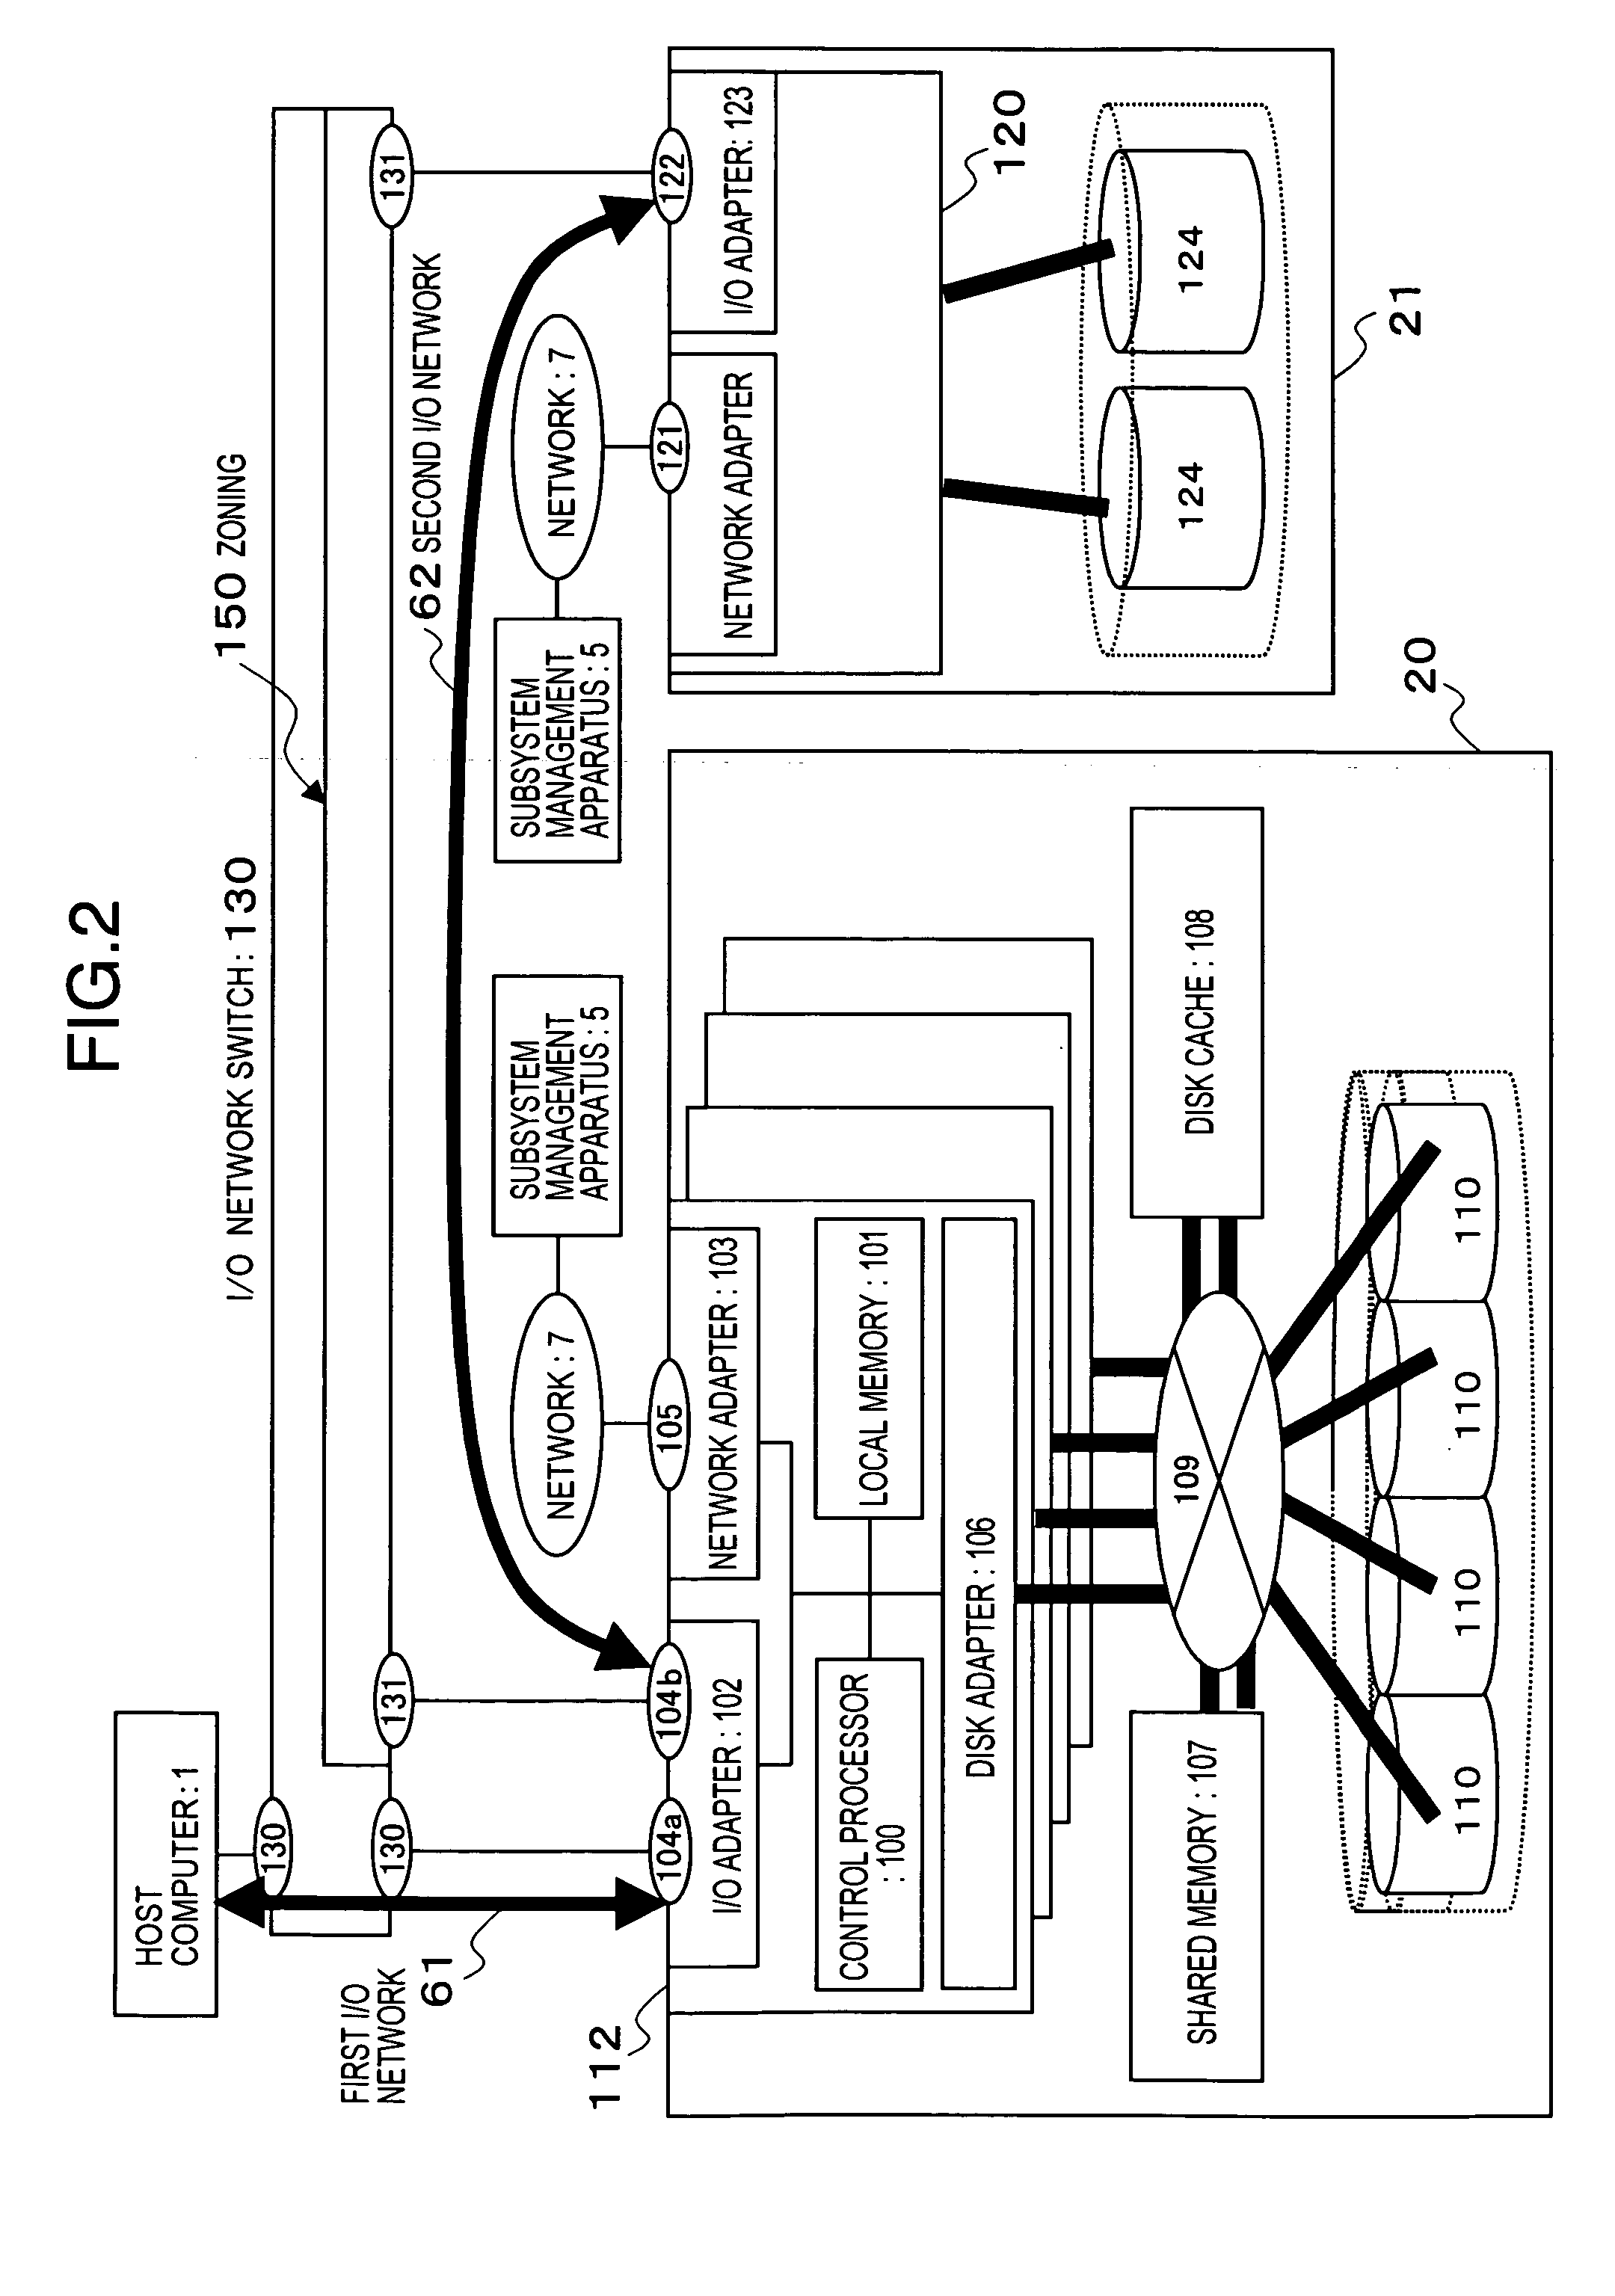 Storage subsystem and performance tuning method